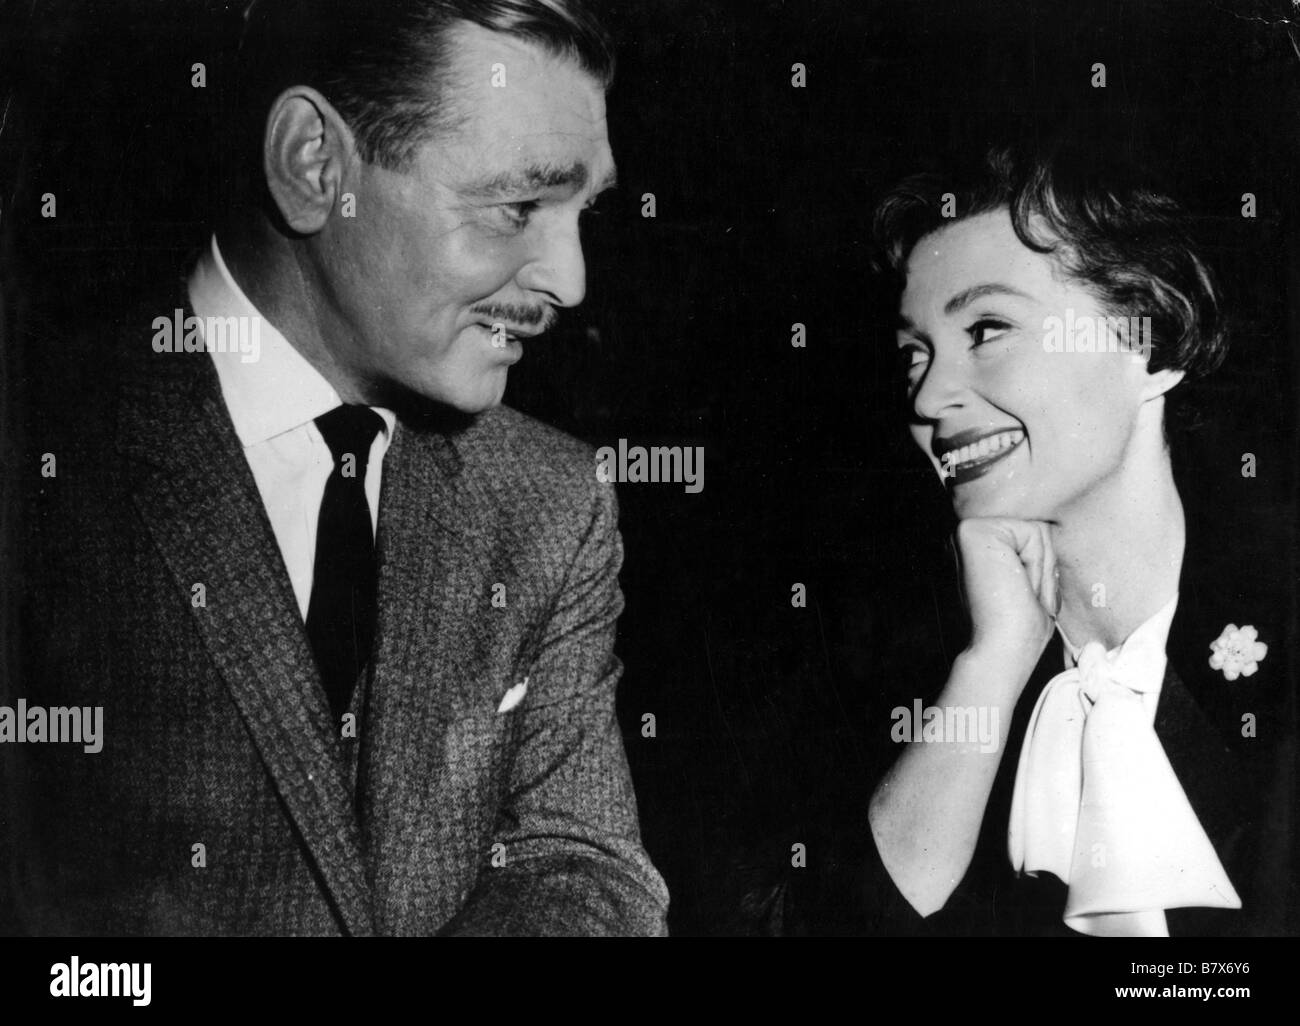 la vie à belles dents But Not for Me  Year: 1959 USA Clark Gable, Lilli Palmer  Director: Walter Lang Stock Photo